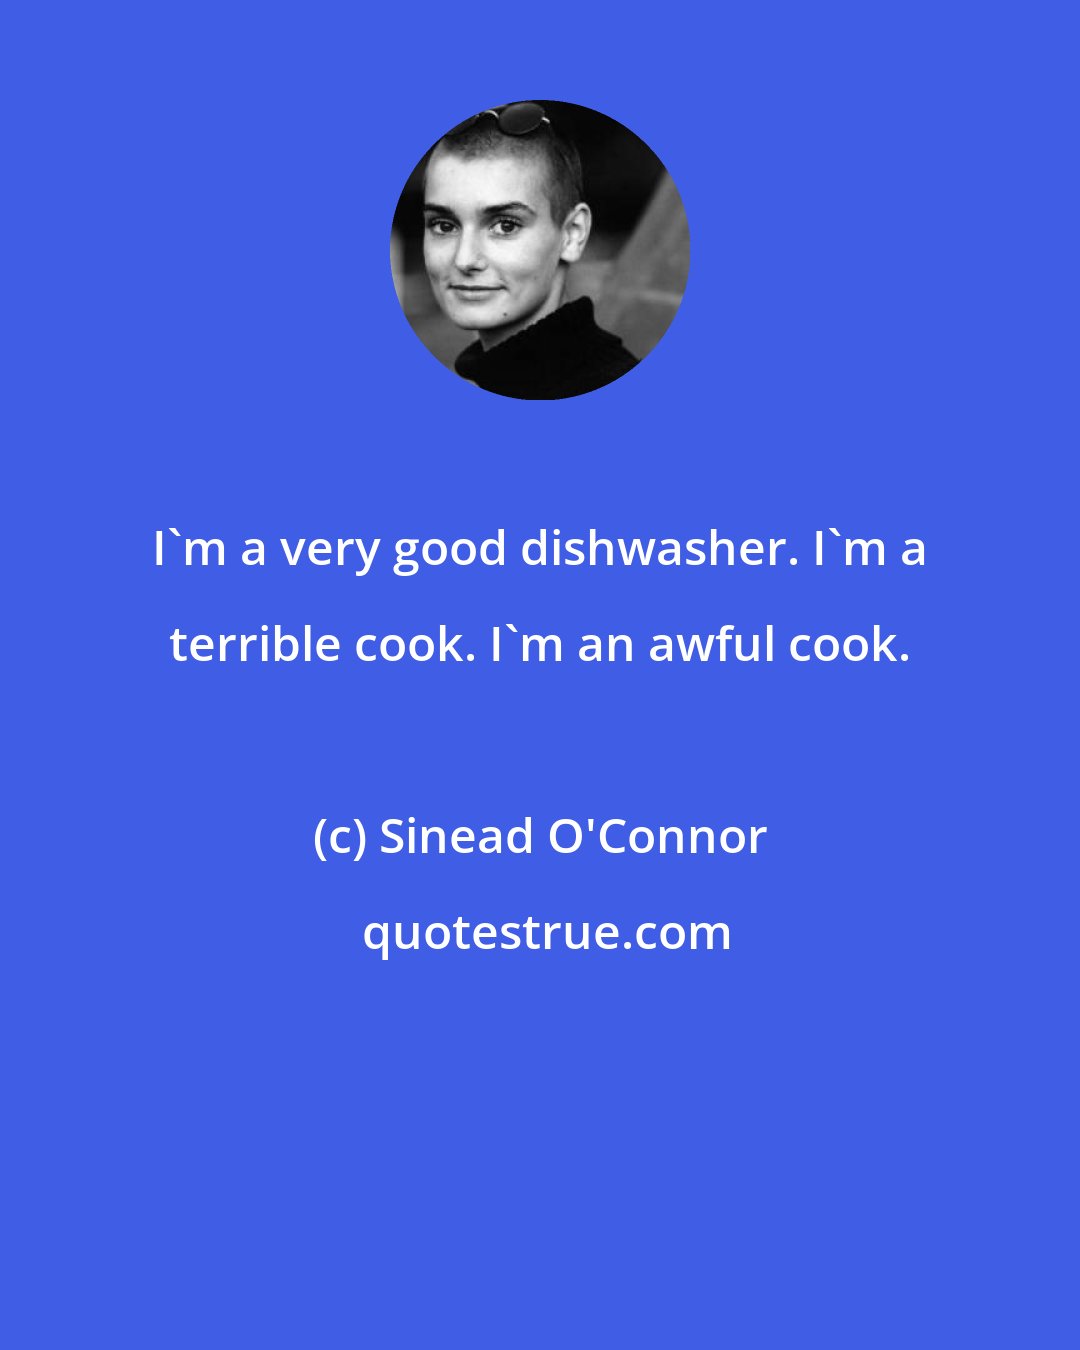 Sinead O'Connor: I'm a very good dishwasher. I'm a terrible cook. I'm an awful cook.